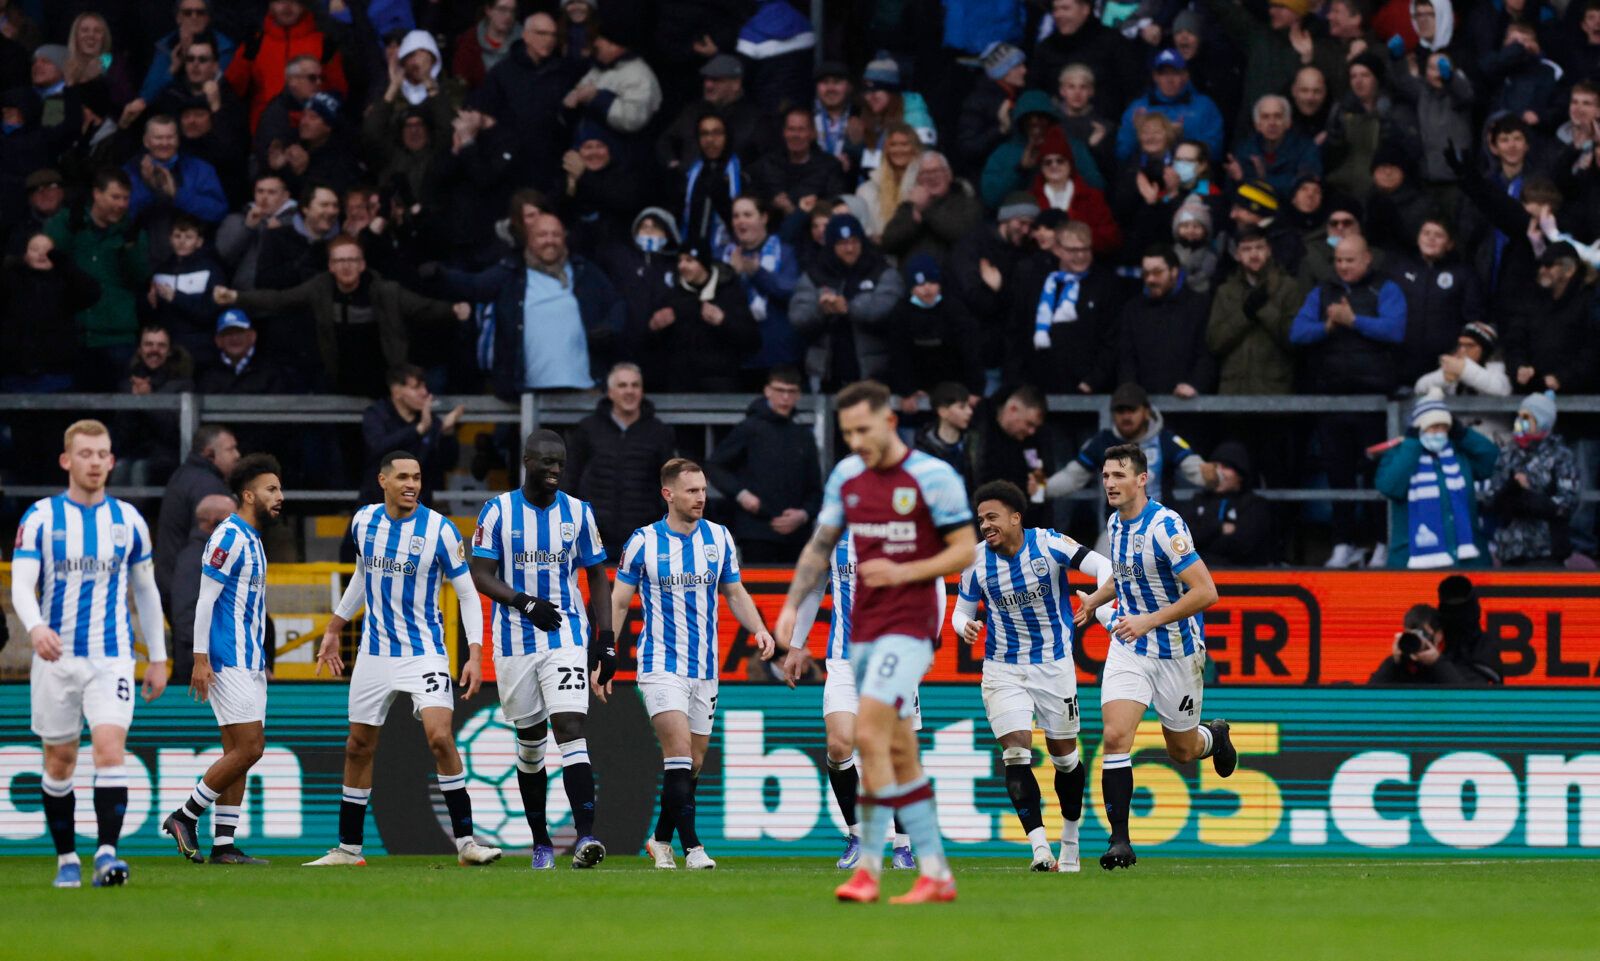 Soccer Football - FA Cup Third Round - Burnley v Huddersfield Town - Turf Moor, Burnley, Britain - January 8, 2022 Huddersfield Town's Matthew Pearson scores their second goal with teammates Action Images via Reuters/Jason Cairnduff